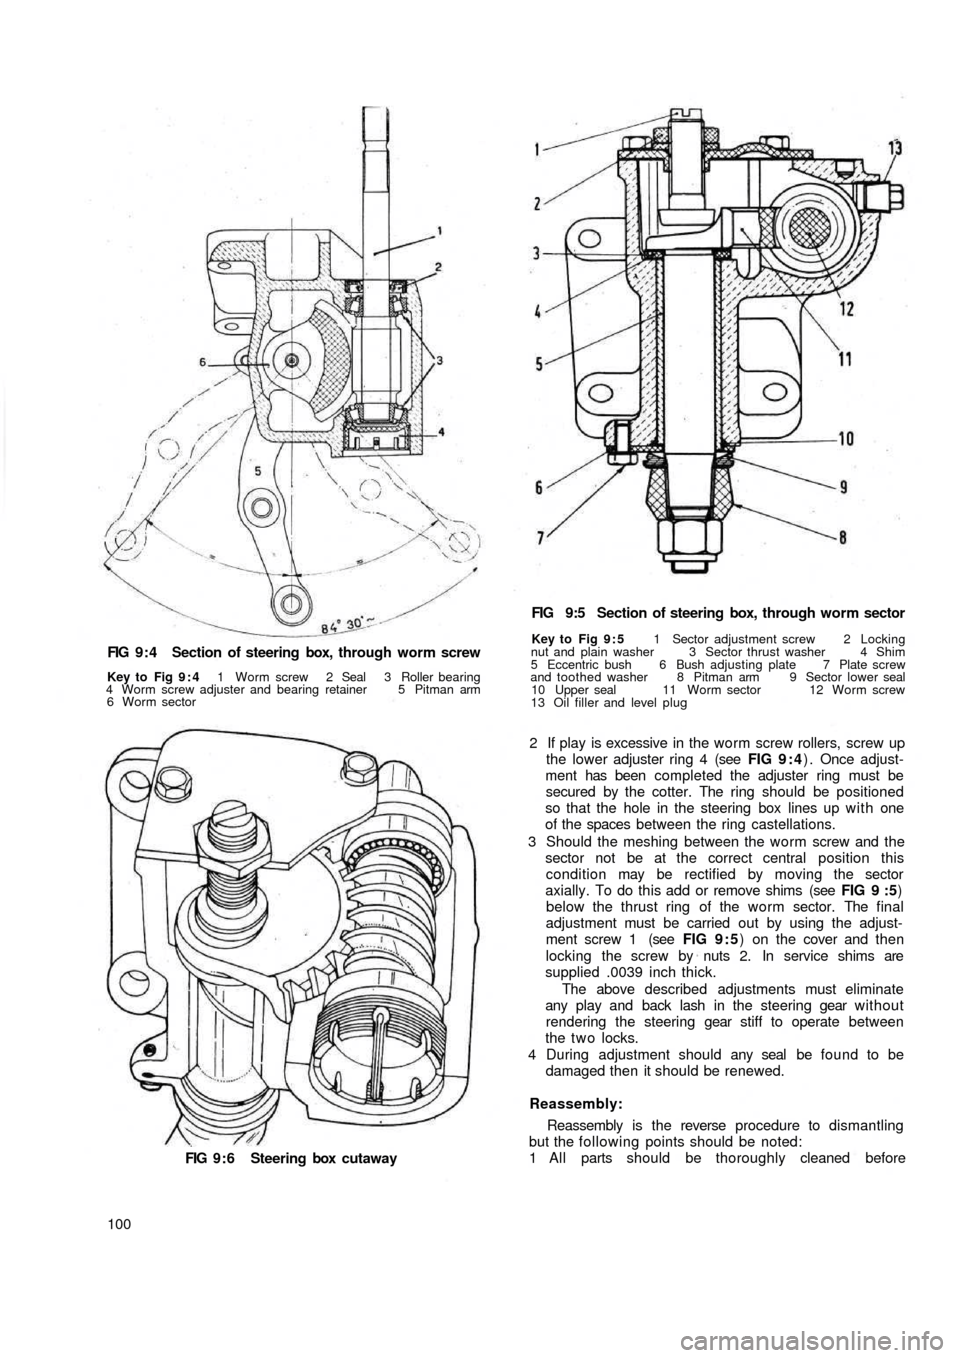 FIAT 500 1960 1.G Workshop Manual FIG 9 : 4  Section of steering box,  through worm screw
Key to  Fig 9 : 4 1 Worm screw 2 Seal 3 Roller bearing
4 Worm screw adjuster and bearing retainer 5 Pitman arm
6 Worm sector
FIG 9 : 6  Steering